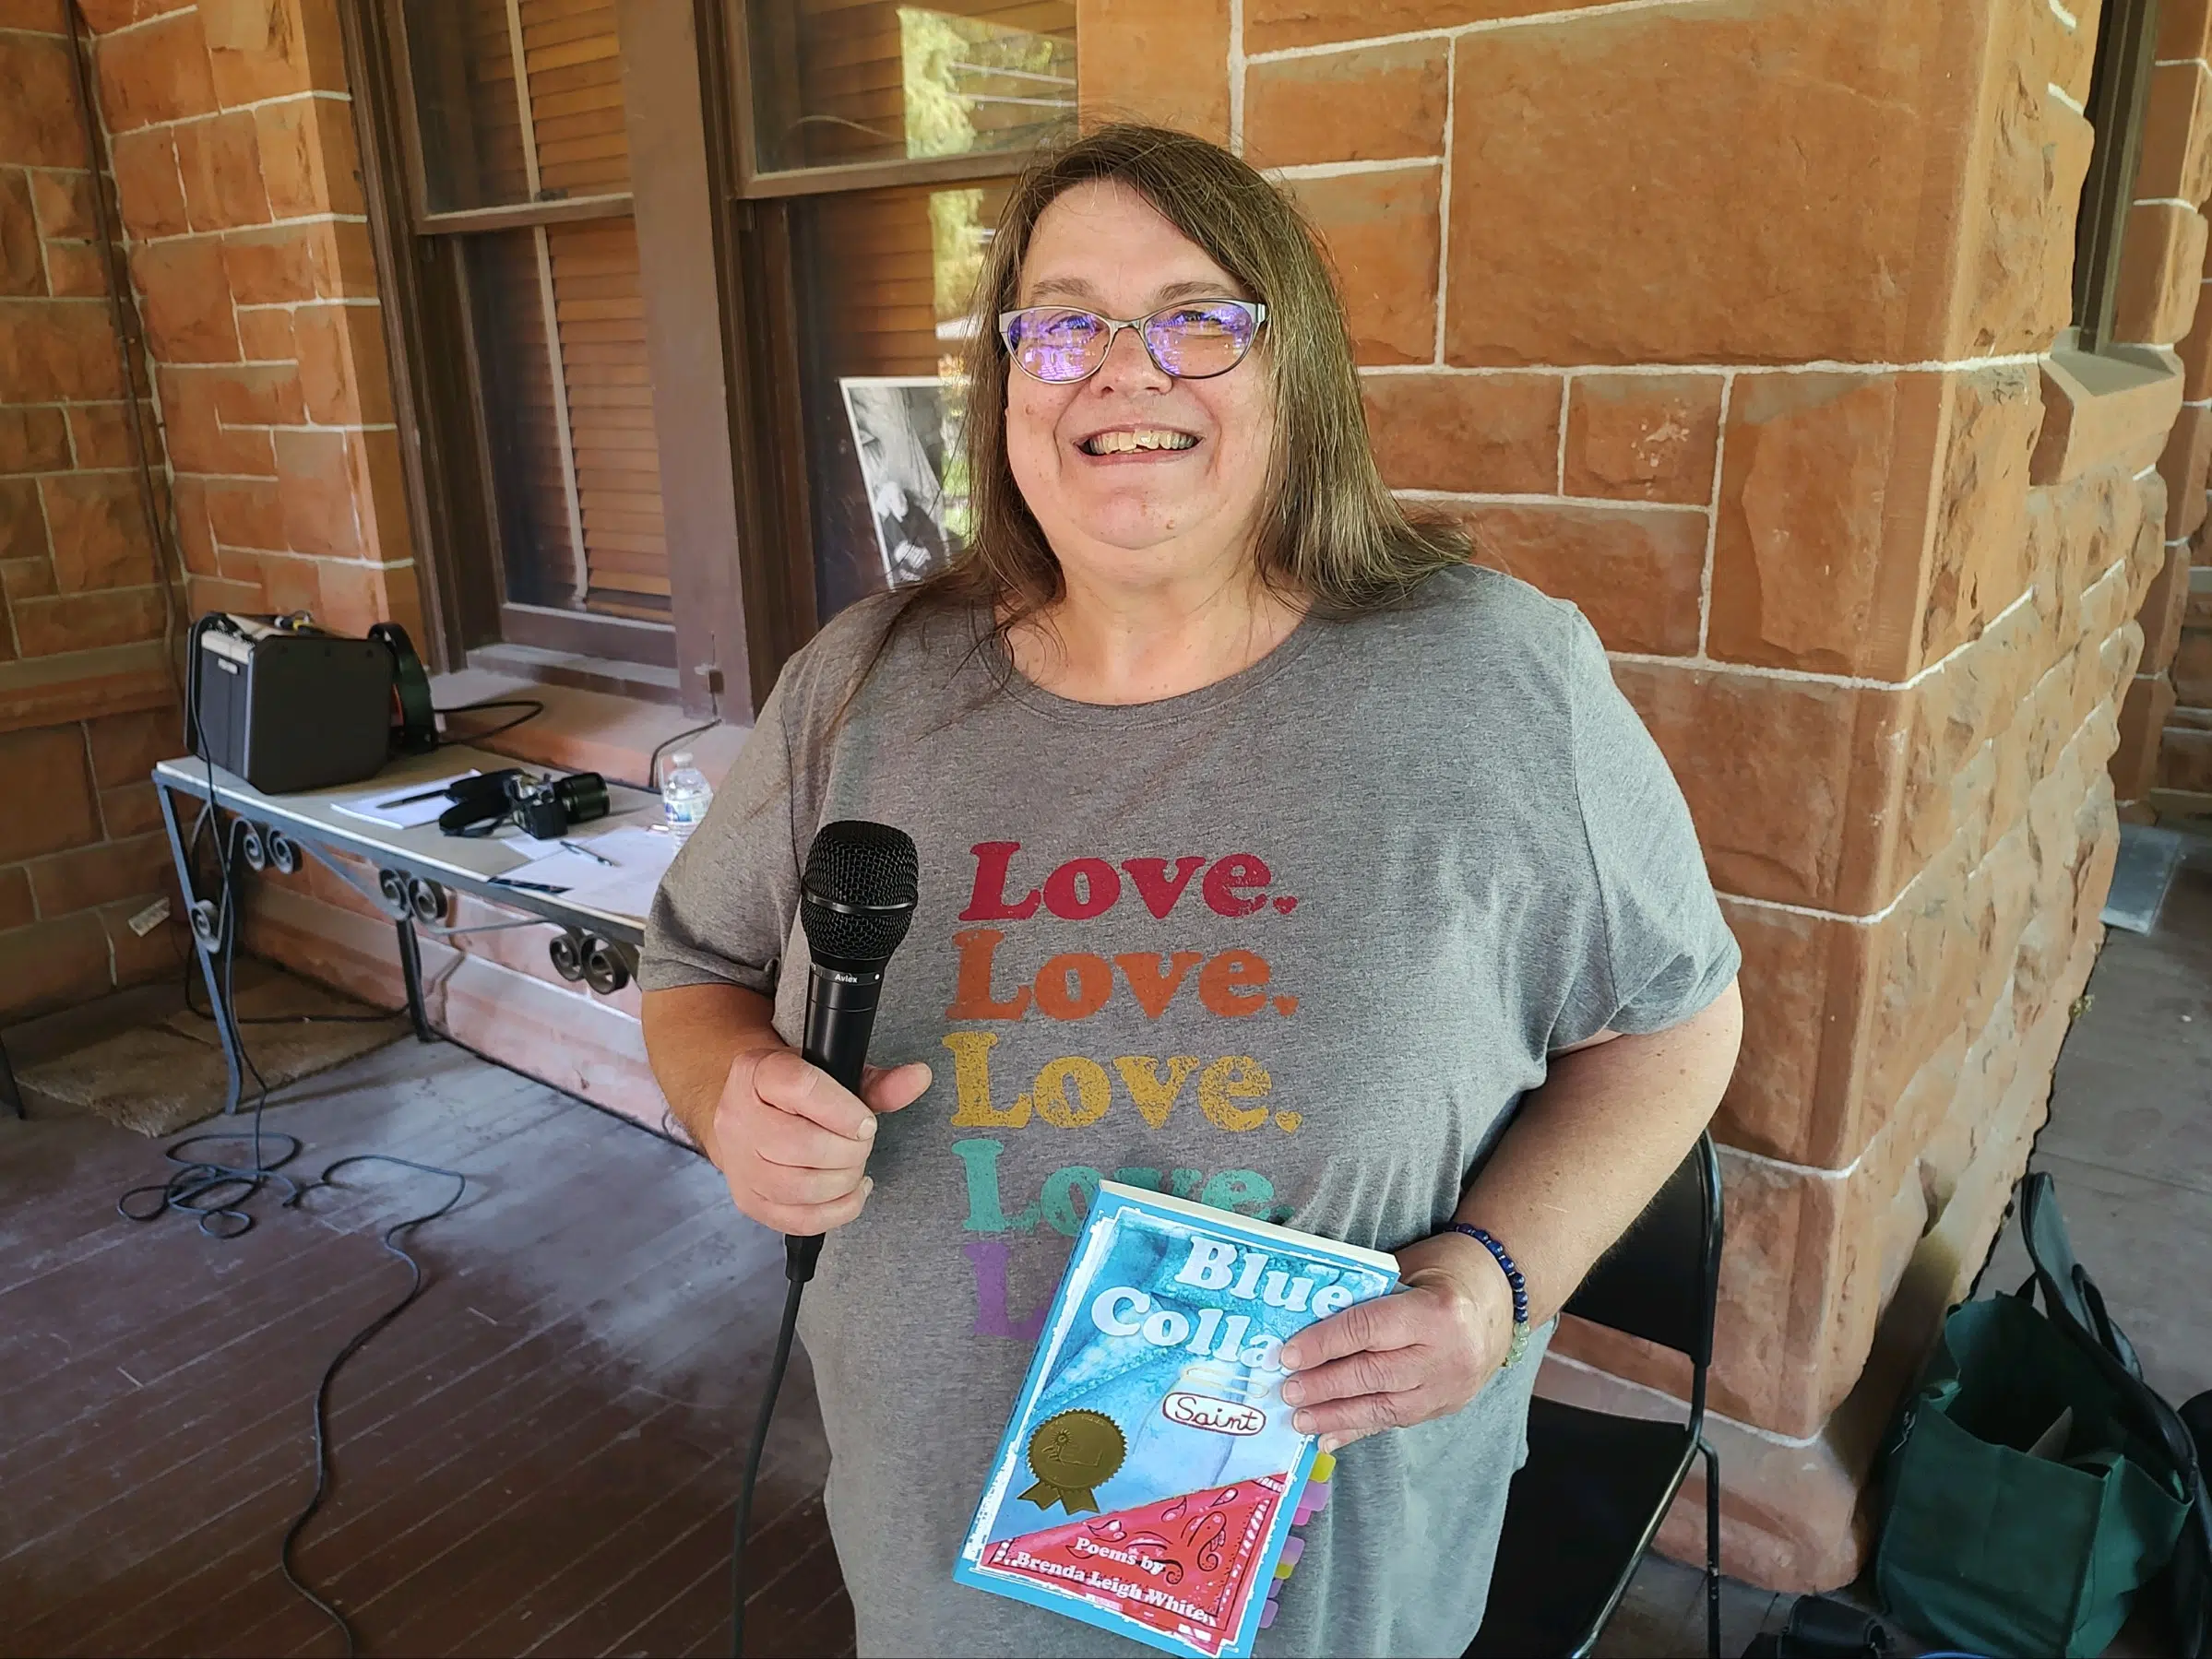 Emporia native Brenda White serves as featured presenter for 15th Poetry on the Porch Sunday